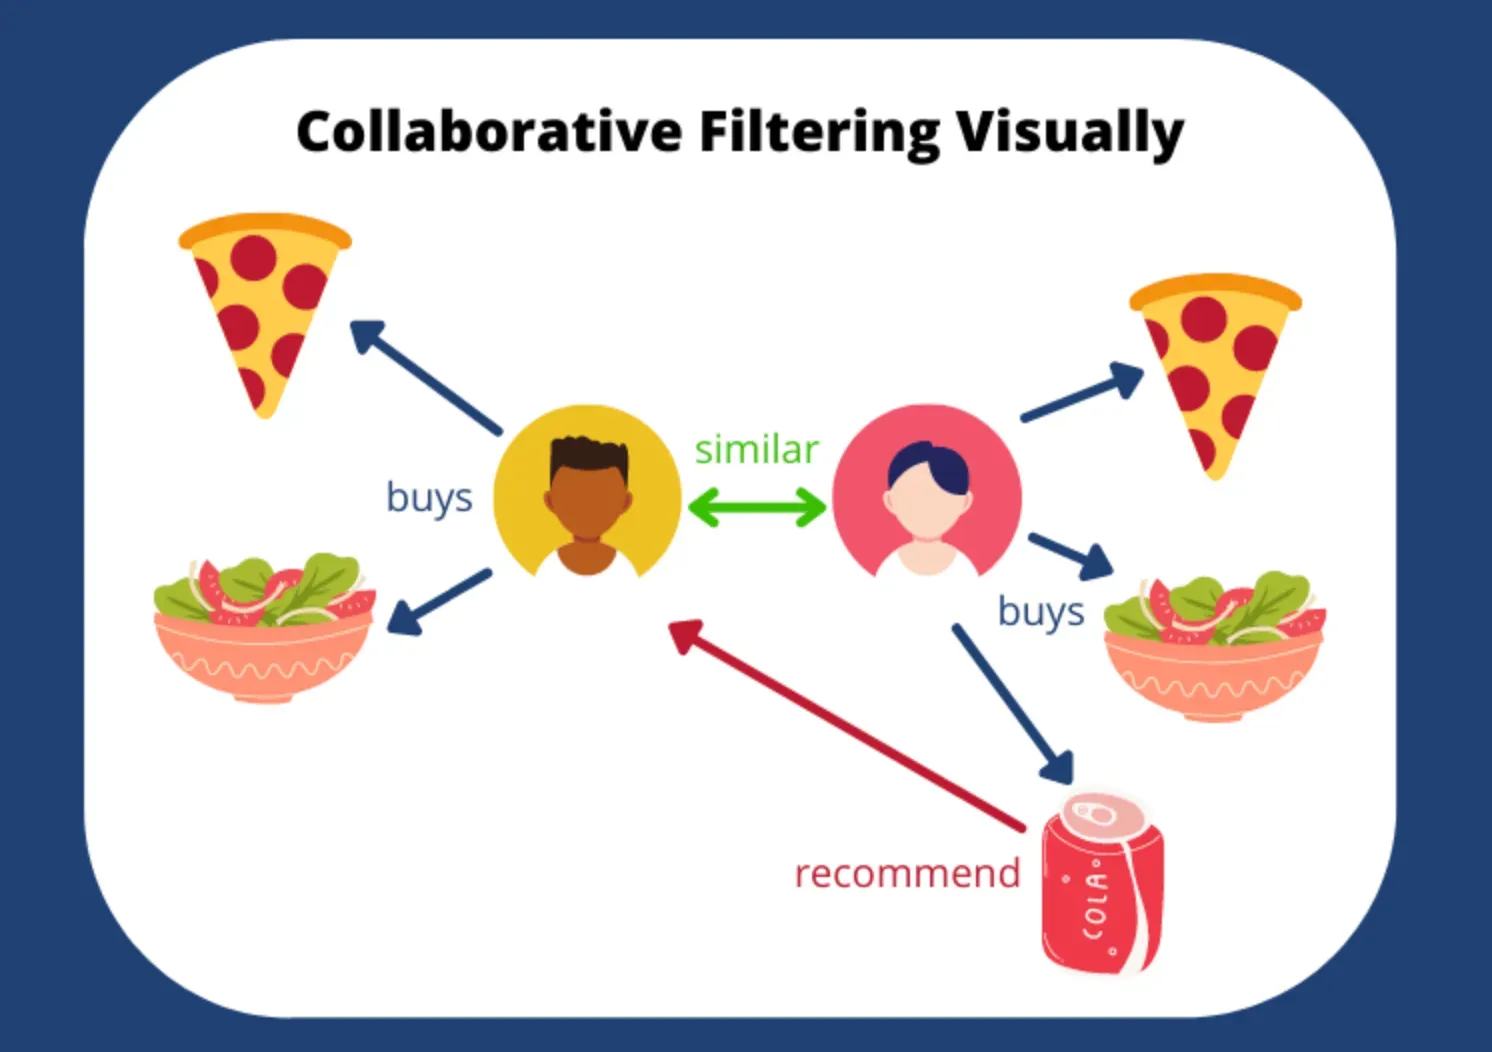 Challenges with Collaborative Filtering